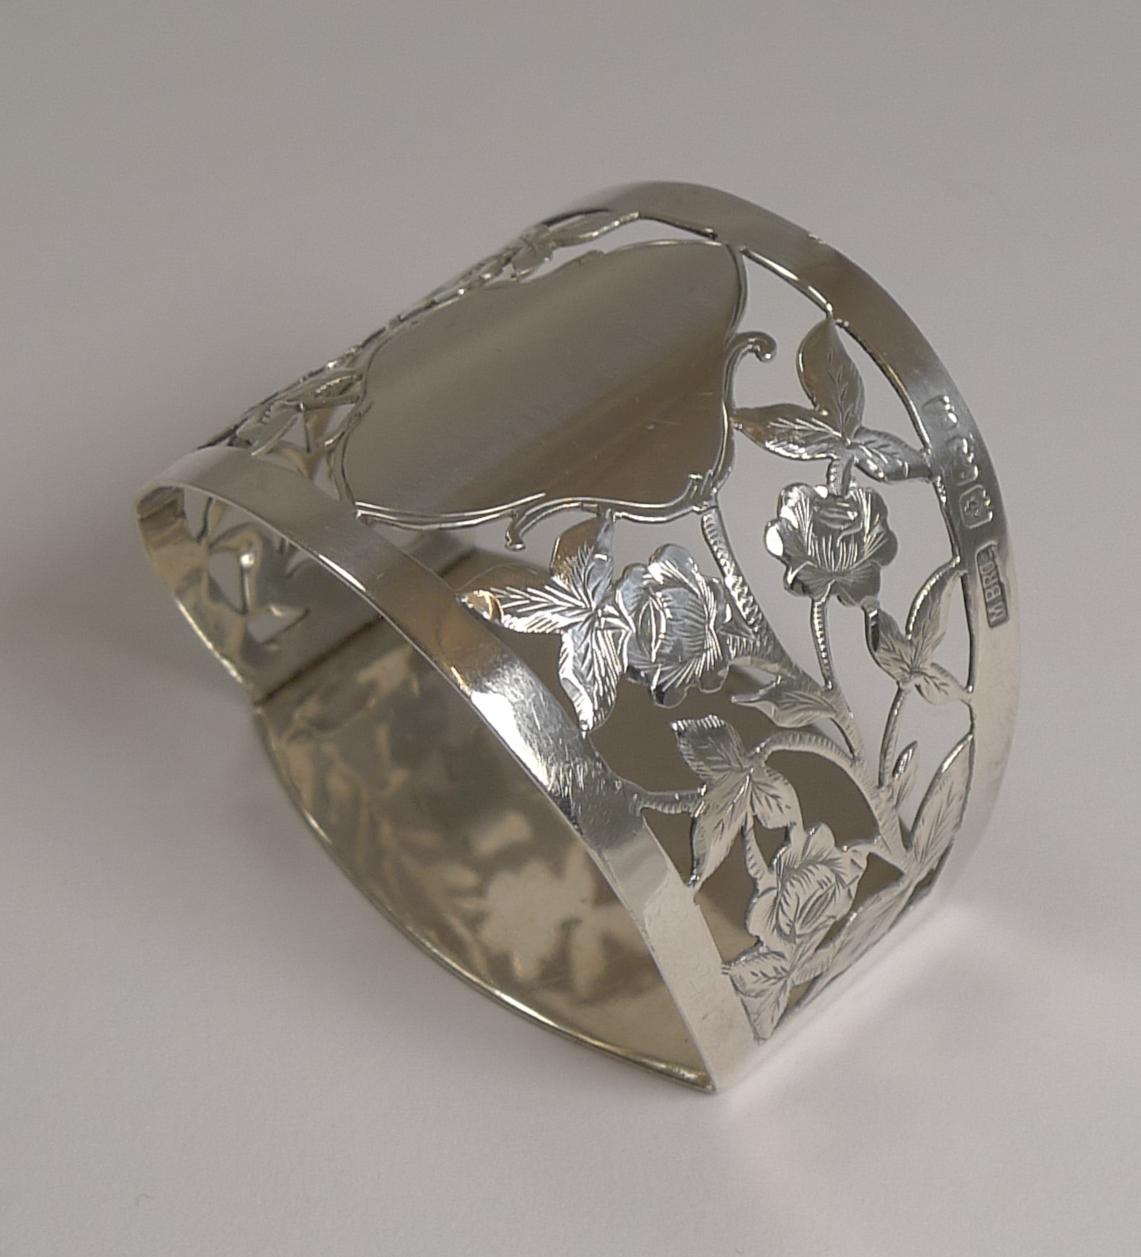 Edwardian Pretty Antique English Sterling Silver Napkin Ring by Mappin Brothers, 1905